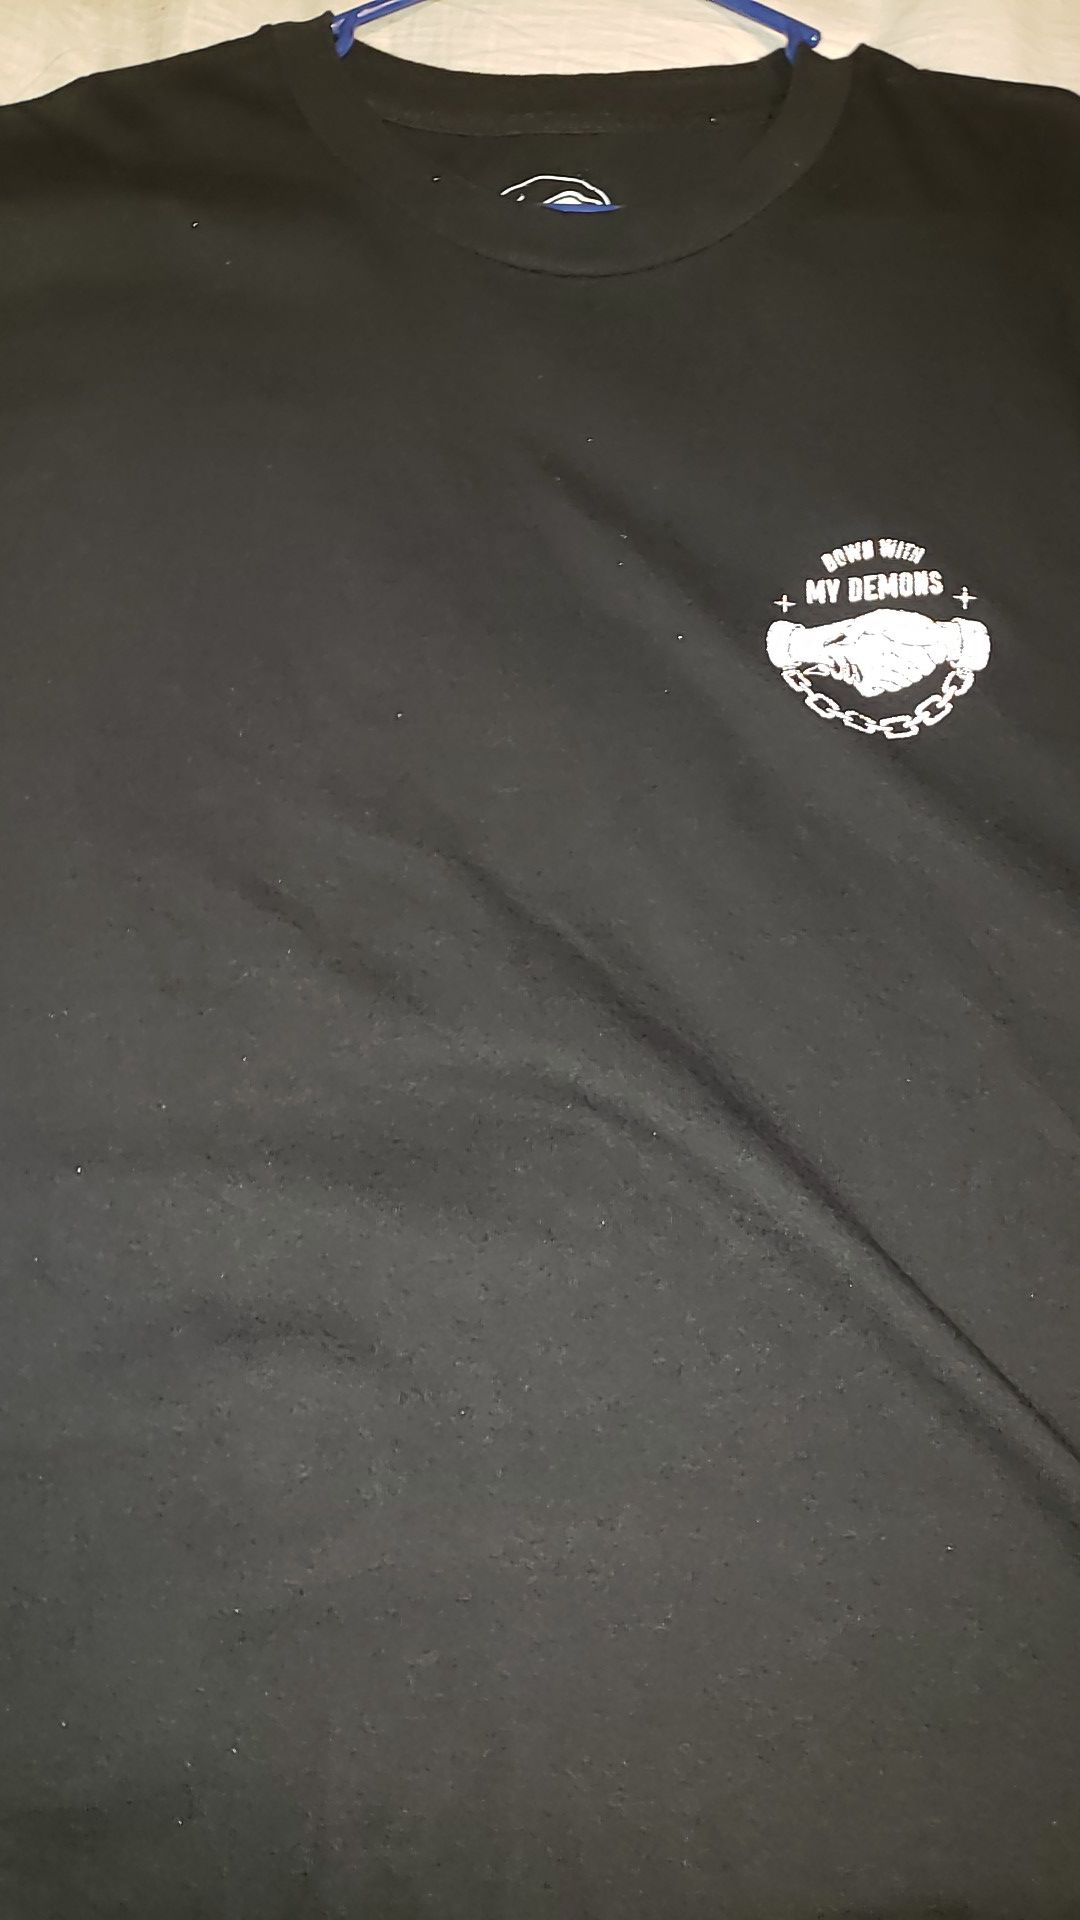 Sketchy Tank Tshirt (Reflective) for Sale in Norco, CA - OfferUp